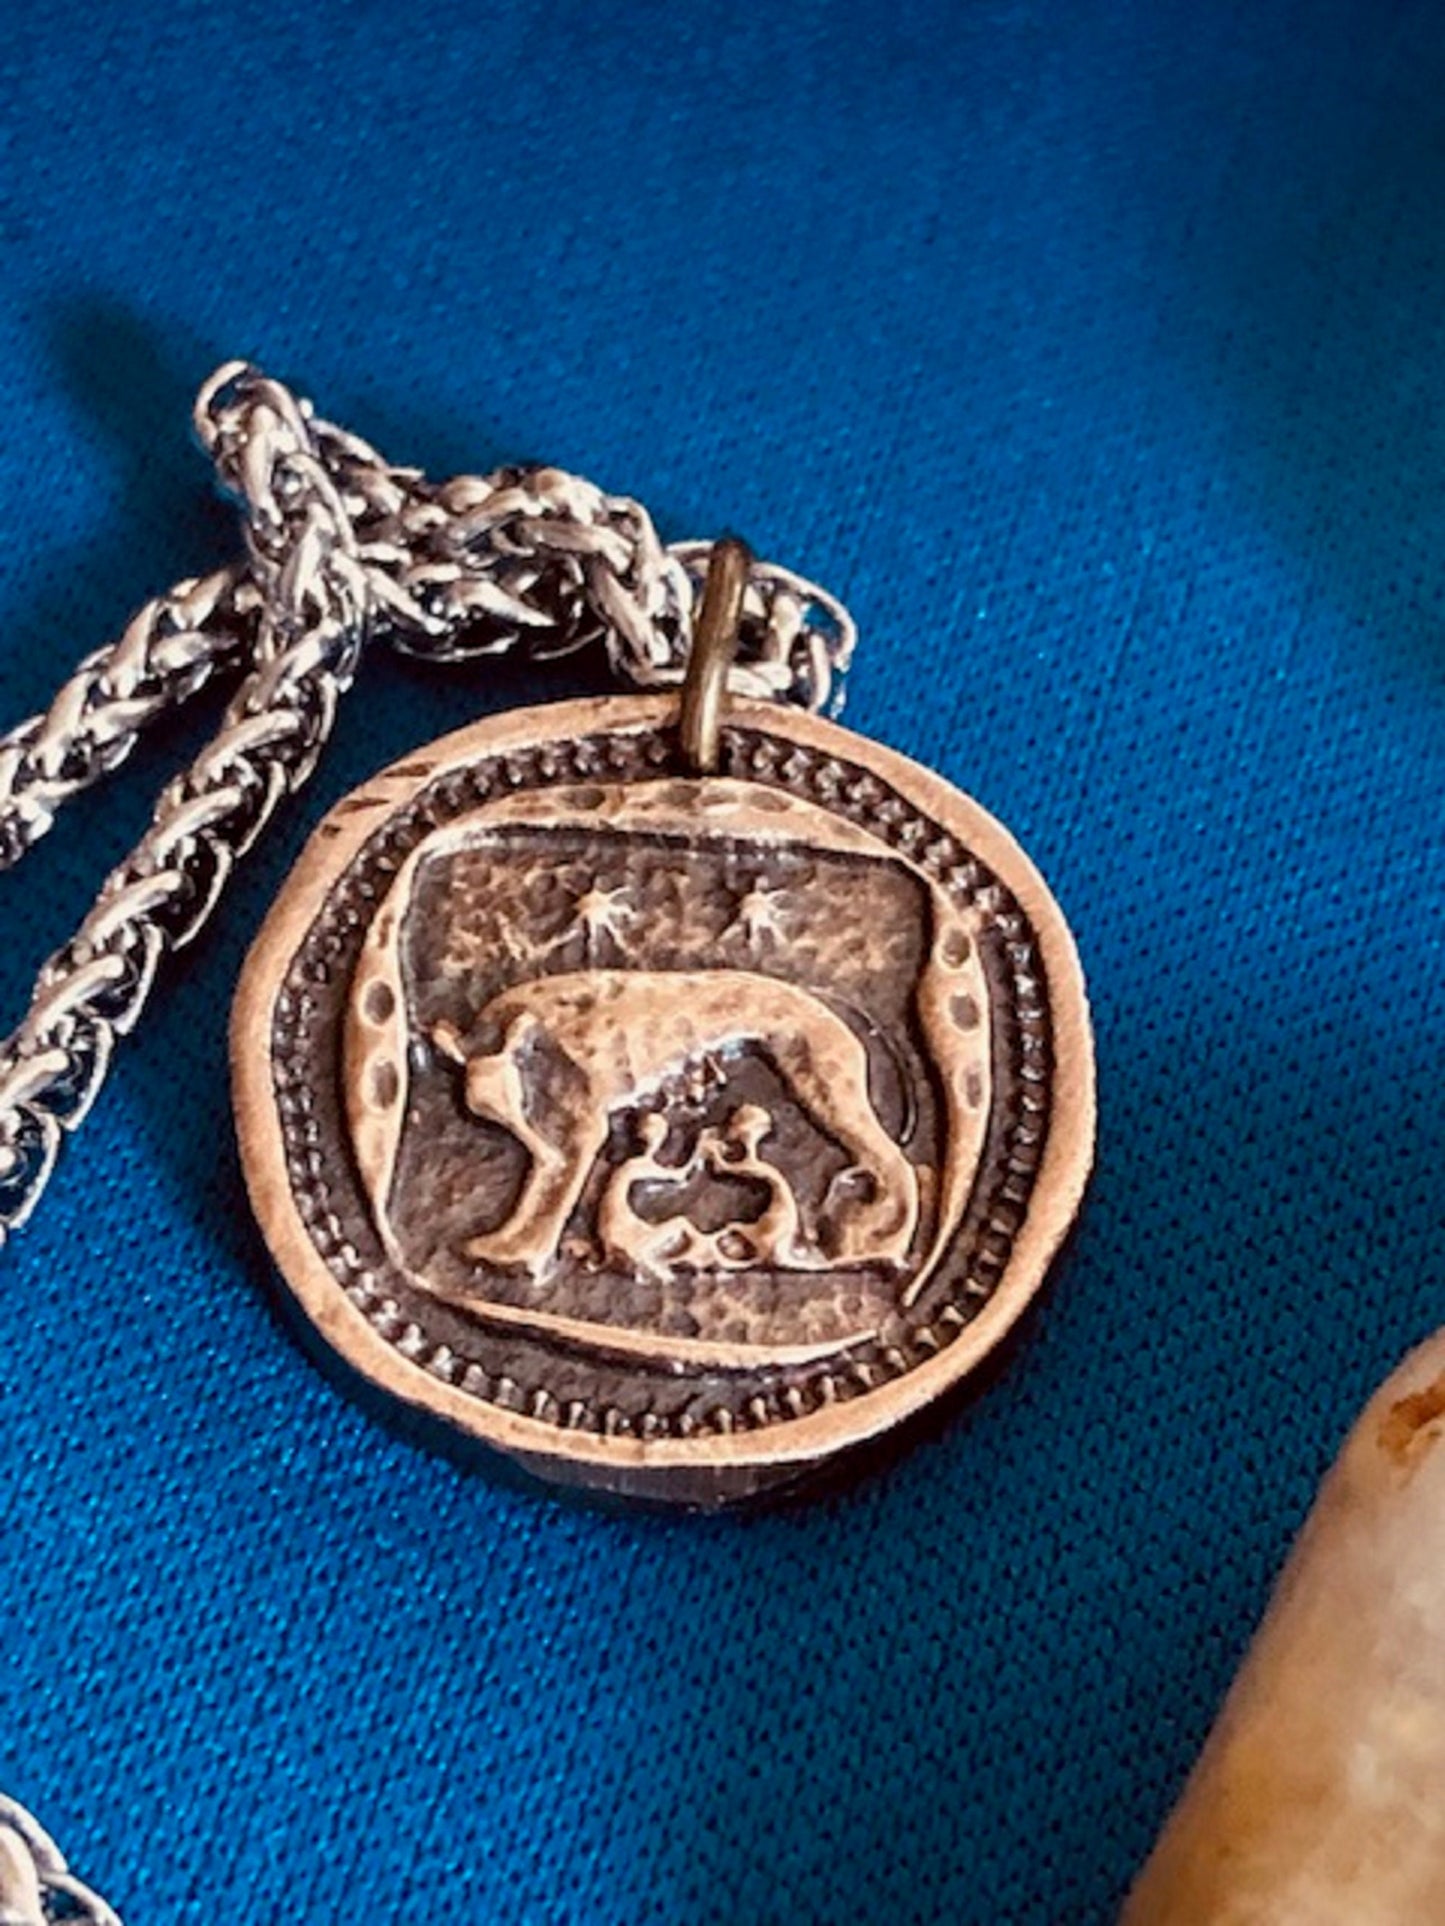 Wax Seal Antique Bronze Rome Pendant - She Wolf Capitoline Suckling Wolves - Jewelry from an Antique Wax Seal - Charm Fascinations 121